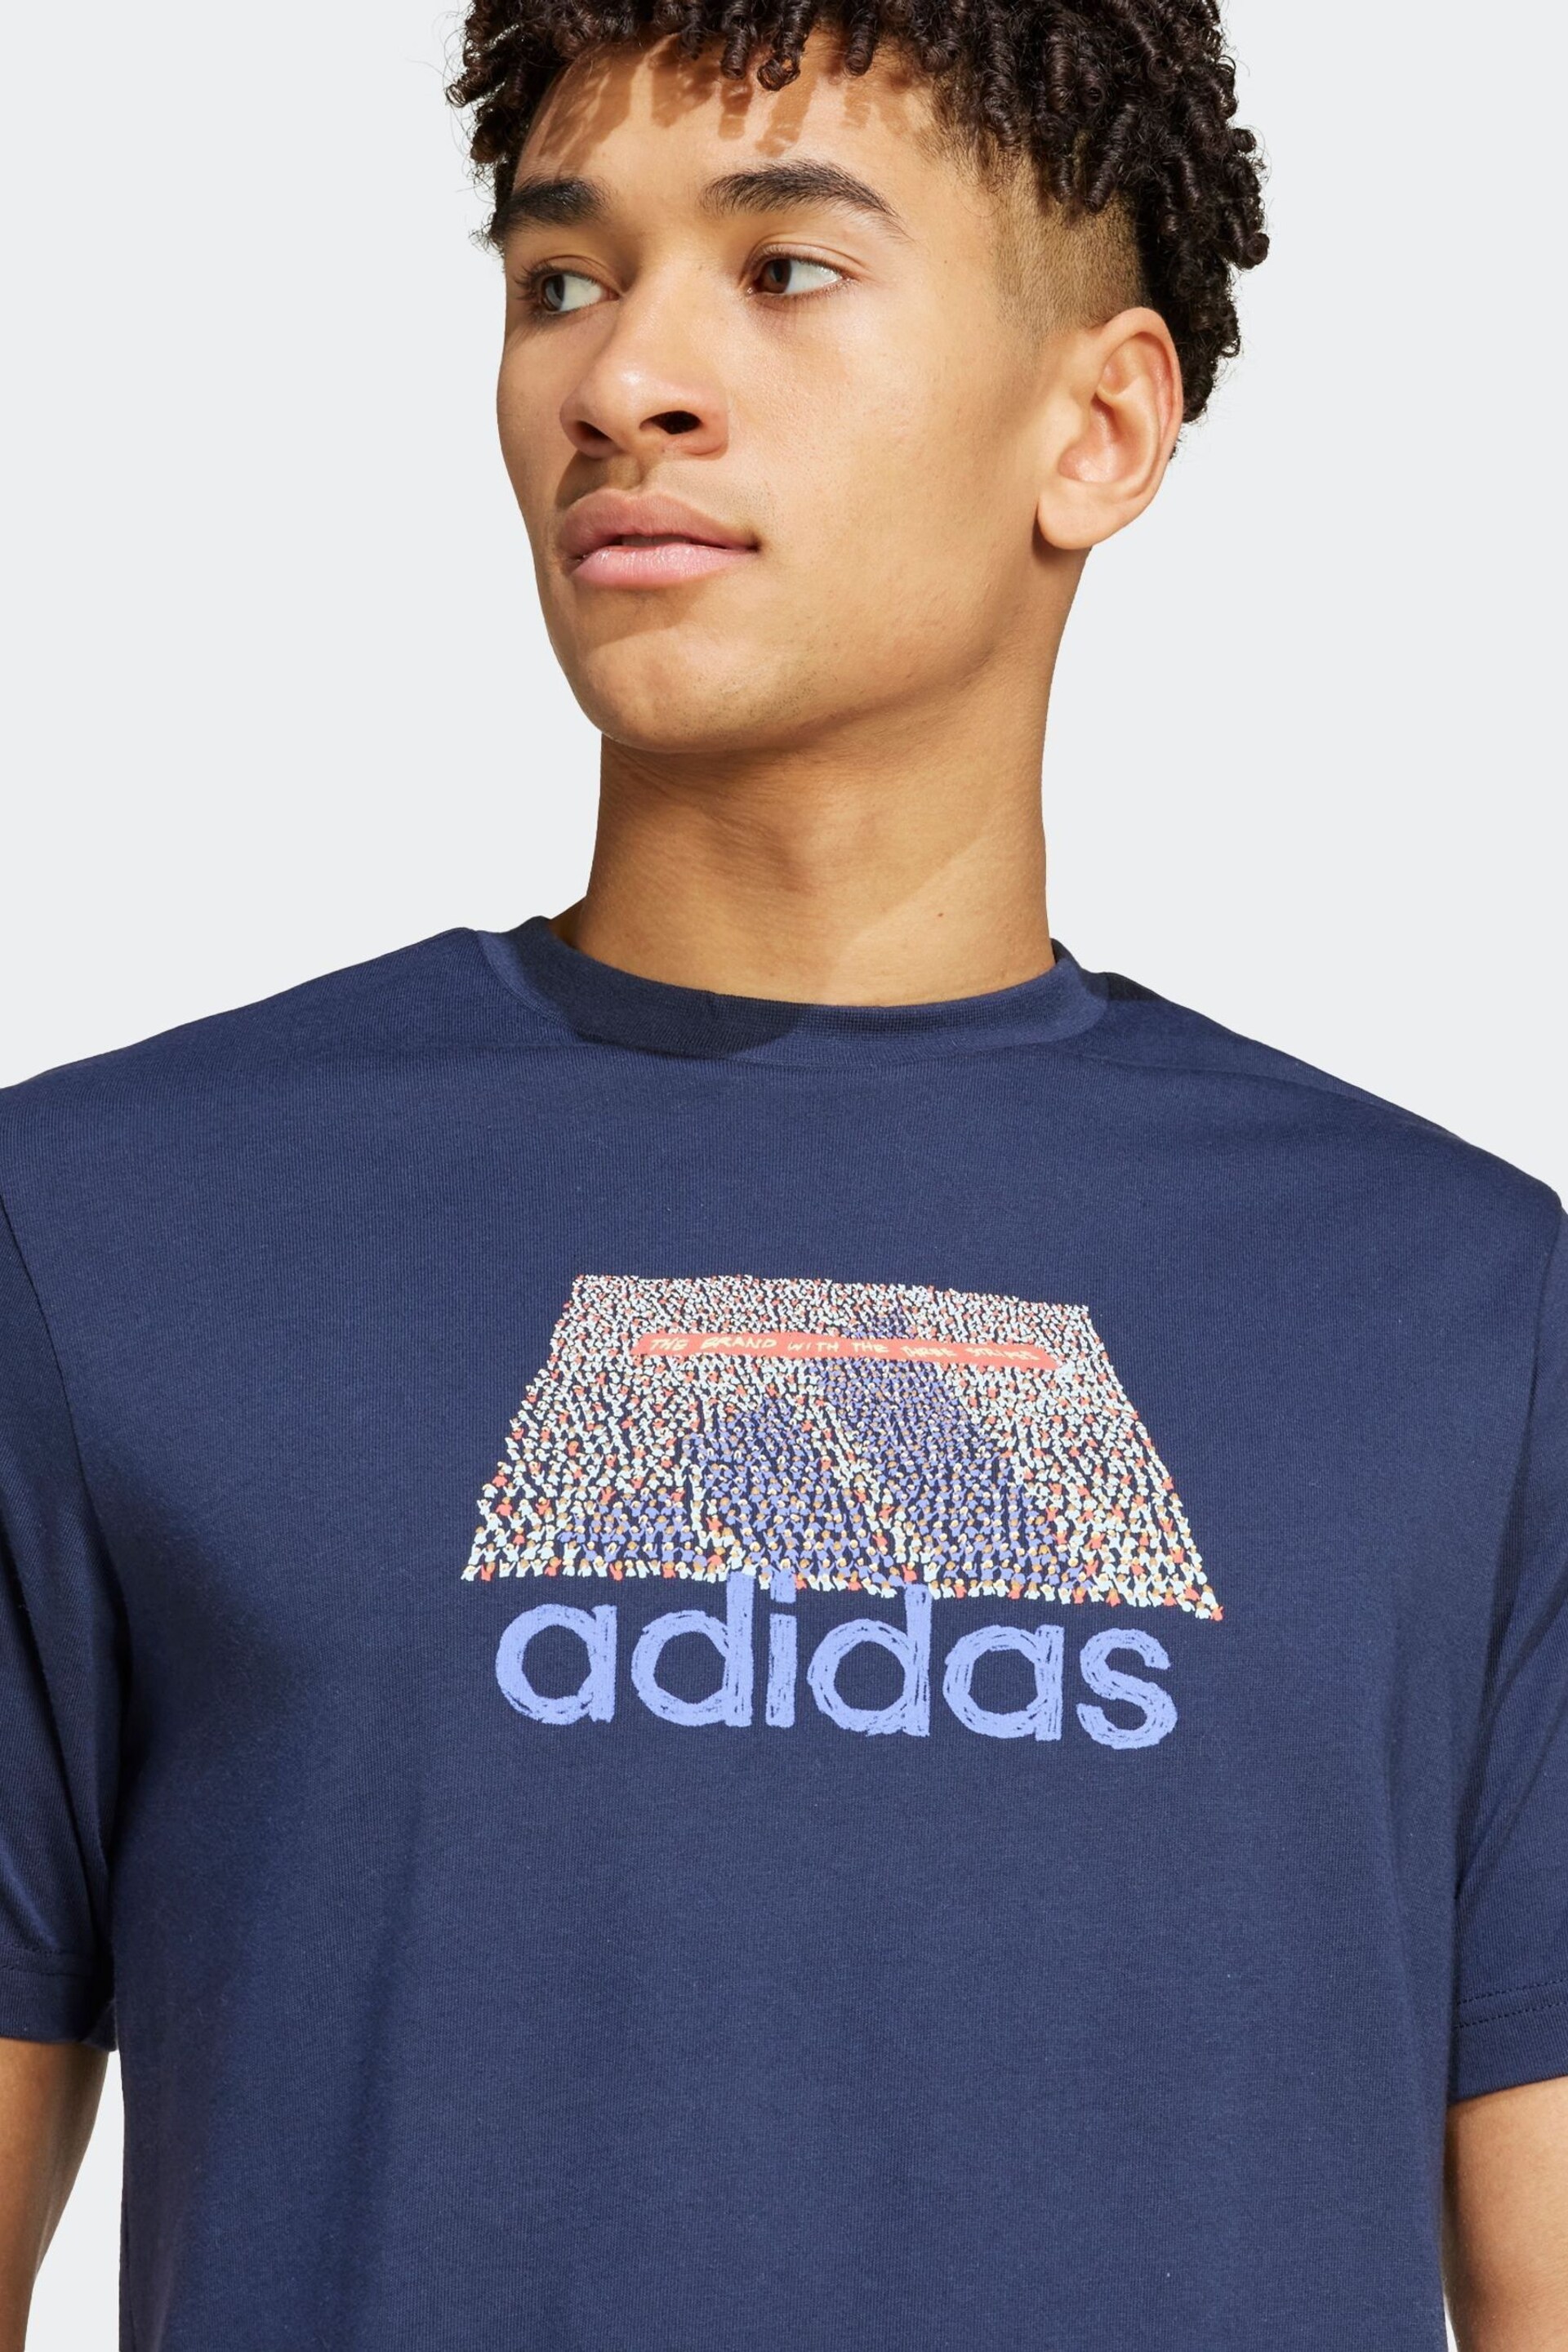 adidas Blue Codes Graphic T-Shirt - Image 5 of 7